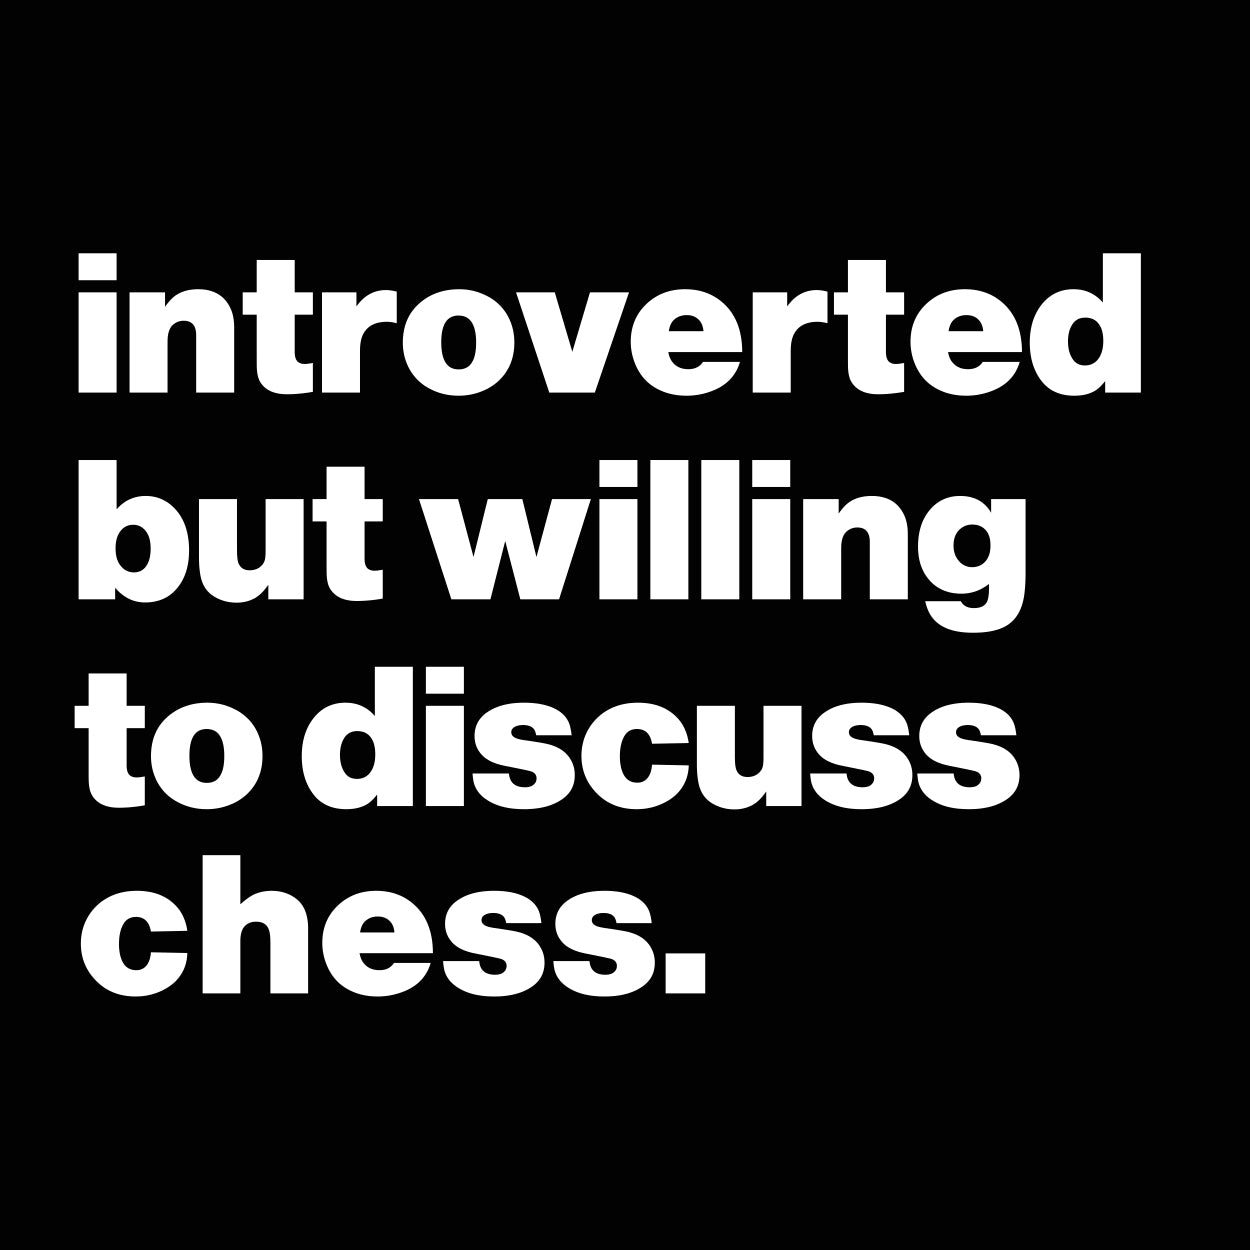 Introverted But Willing To Discuss Chess Tshirt - Donkey Tees